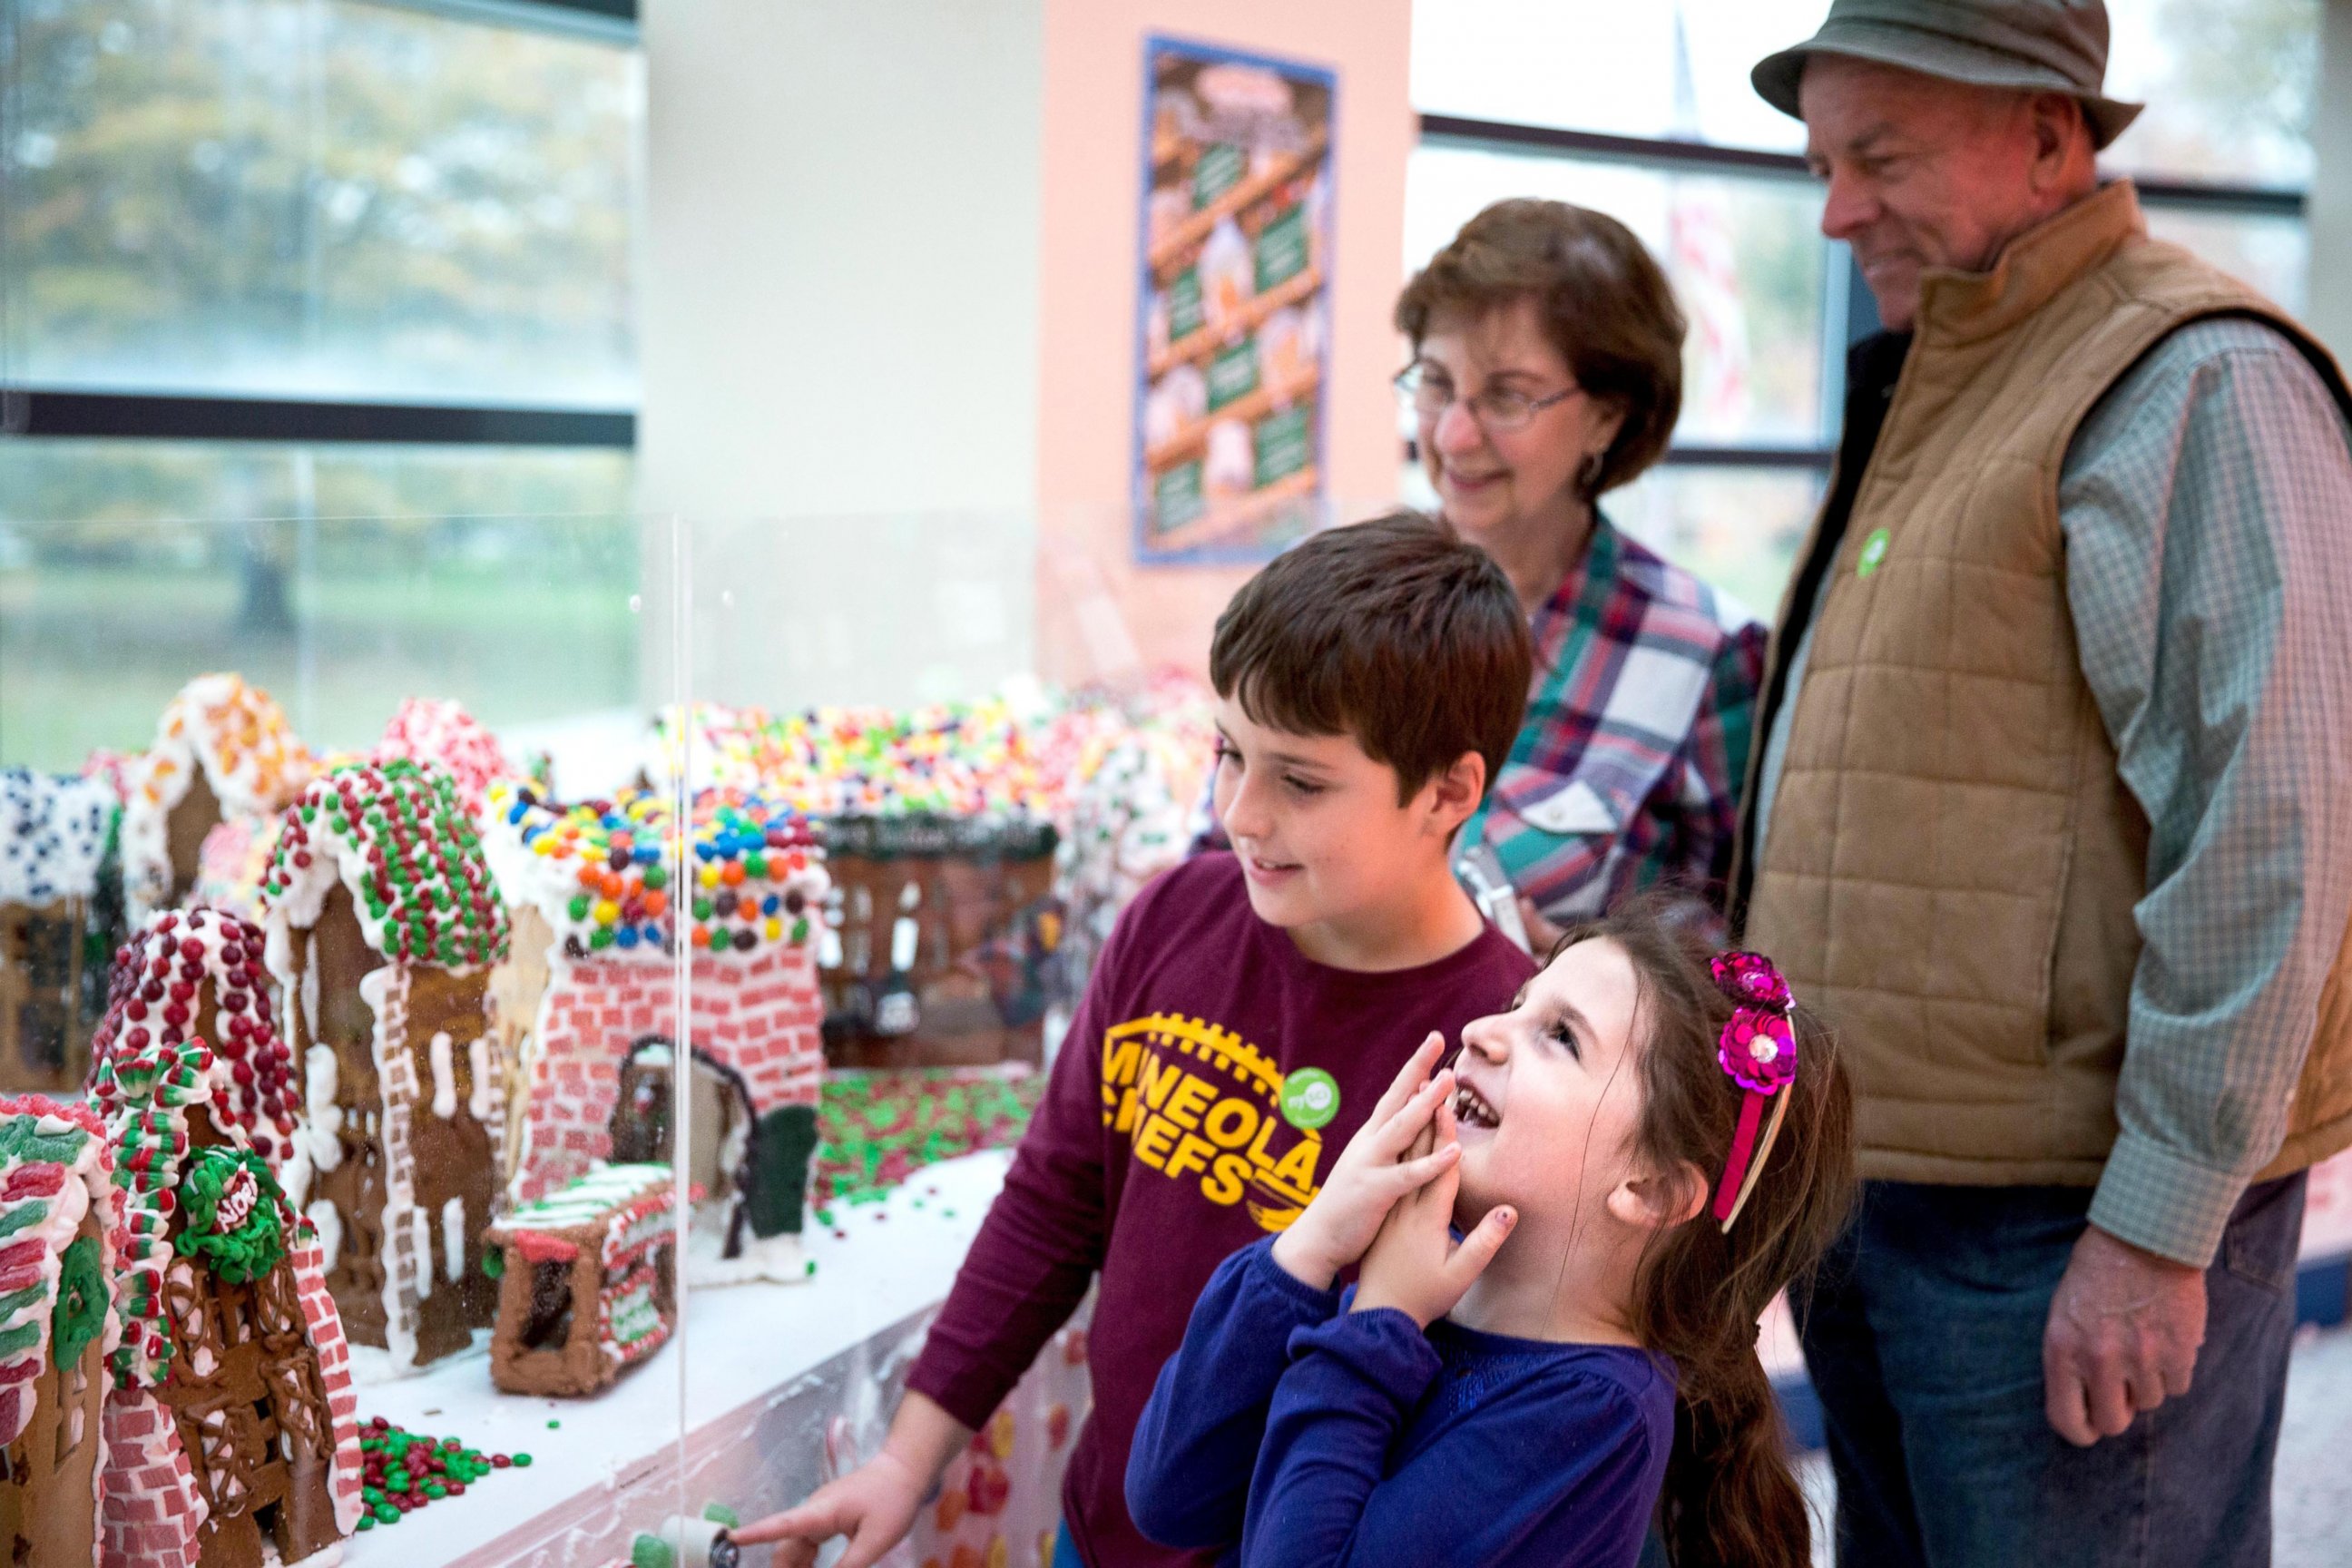 PHOTO: Families flock to "Gingerbread Lane" each year.